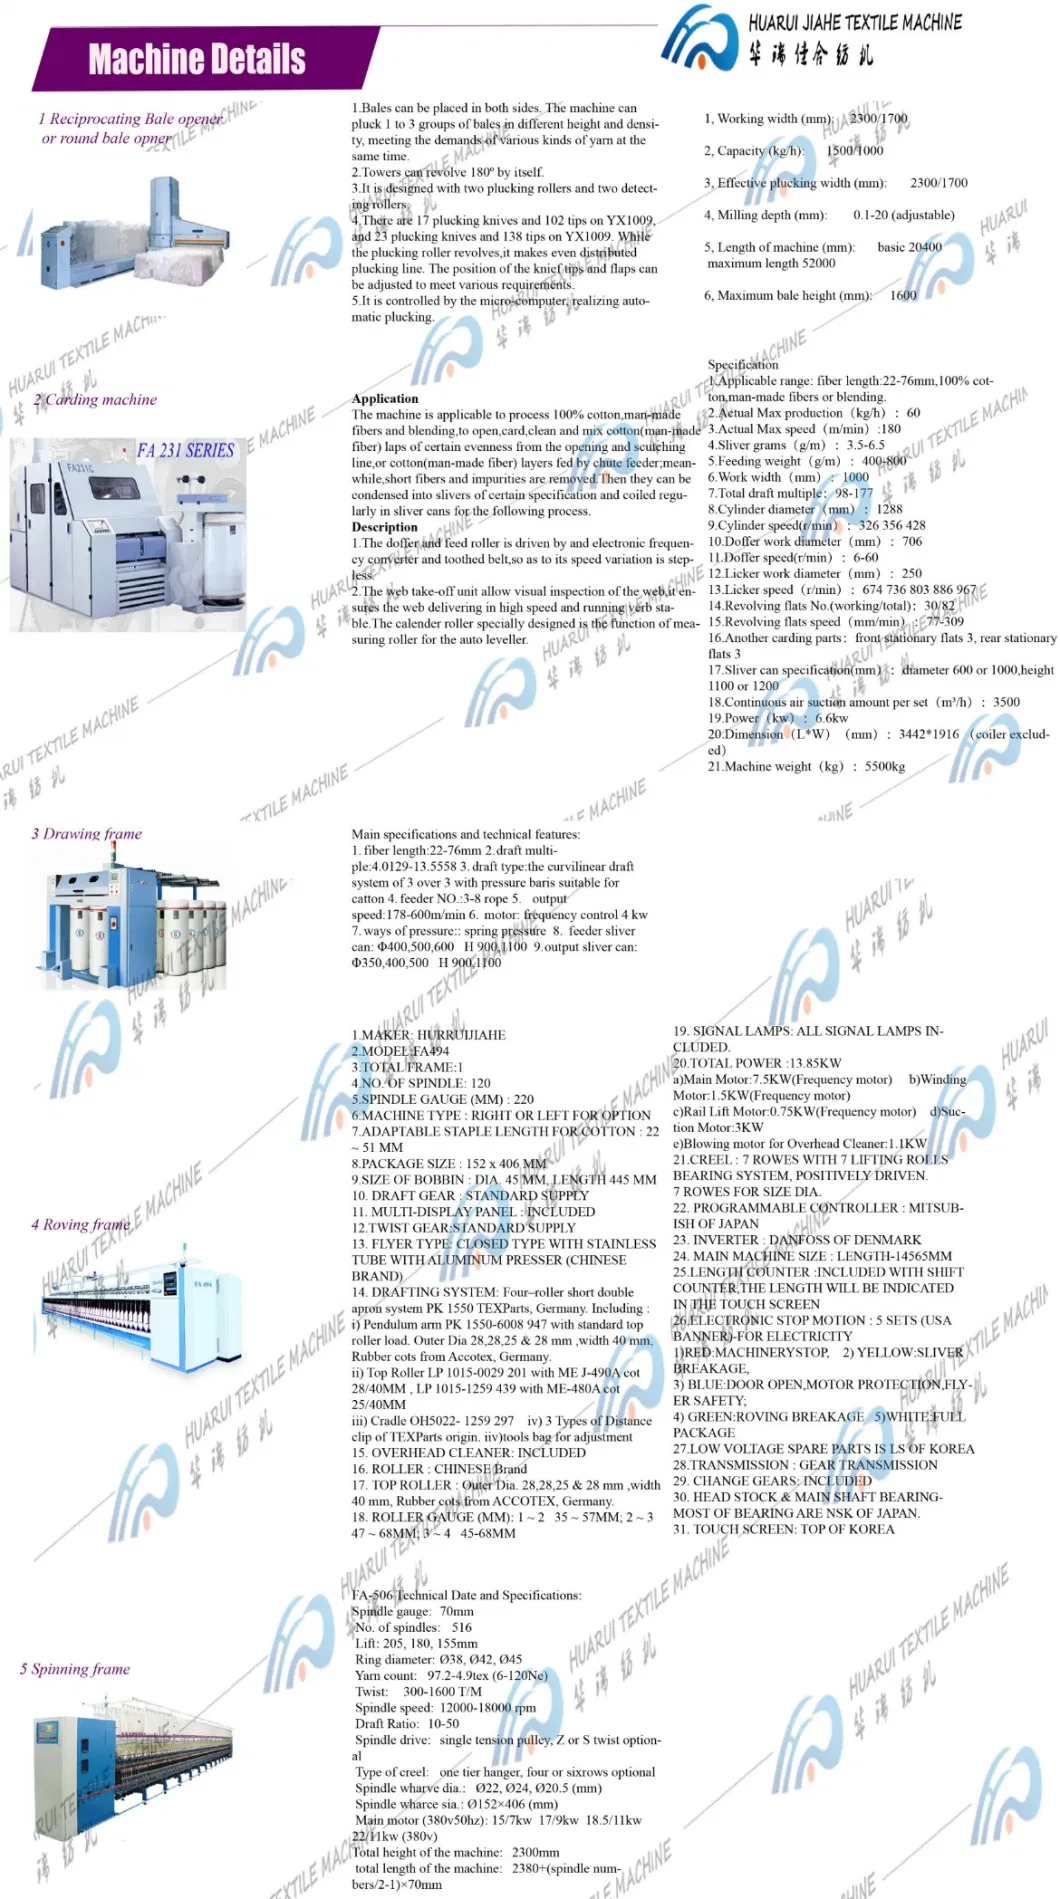 Automation Control Spray Type Hank Yarn Bleaching and Dyeing Machine, Yarn Spray Dyeing Machine Low Loss of Skein, Low Water Ratio Dyeing, Low Speed Noise Small